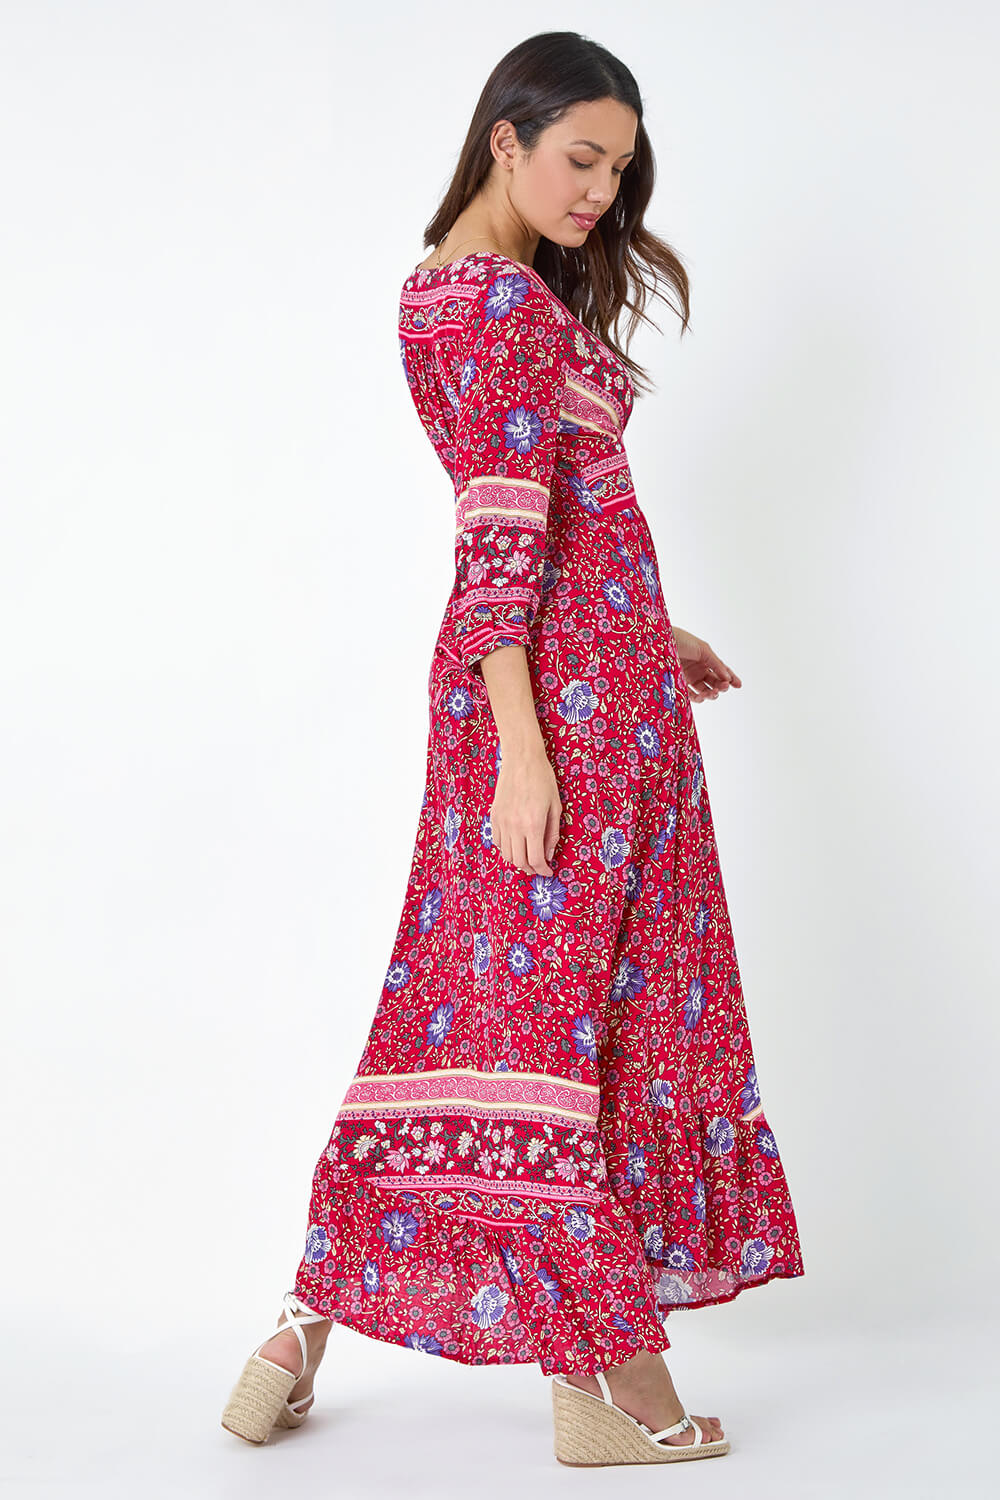 Red Floral Border Print Maxi Dress, Image 3 of 5